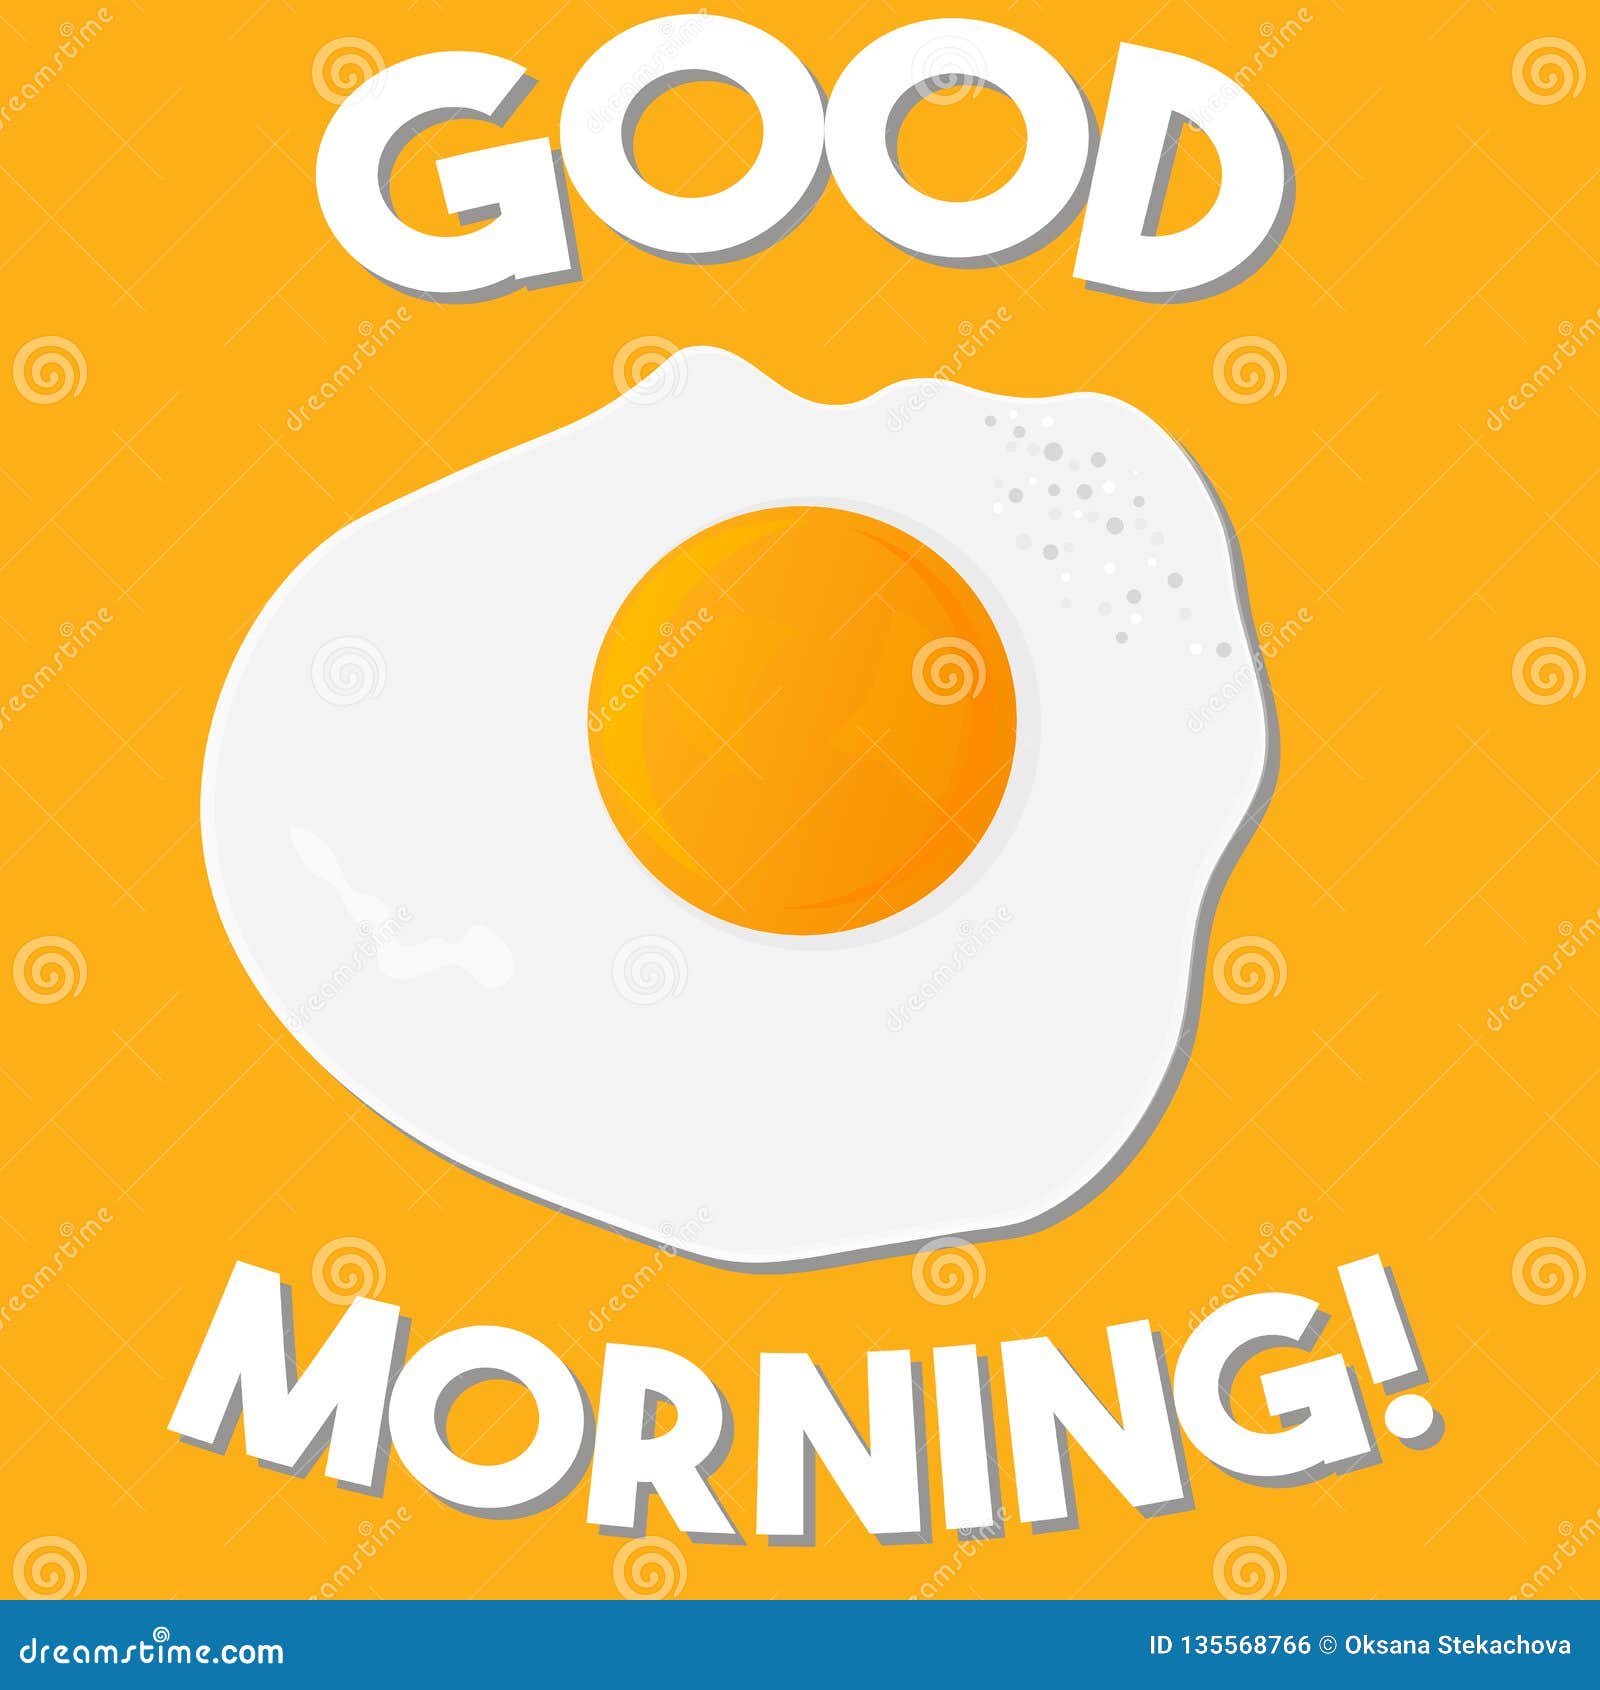 Good Morning Lettering Vector Illustration with Scrambled Eggs . Flat ...